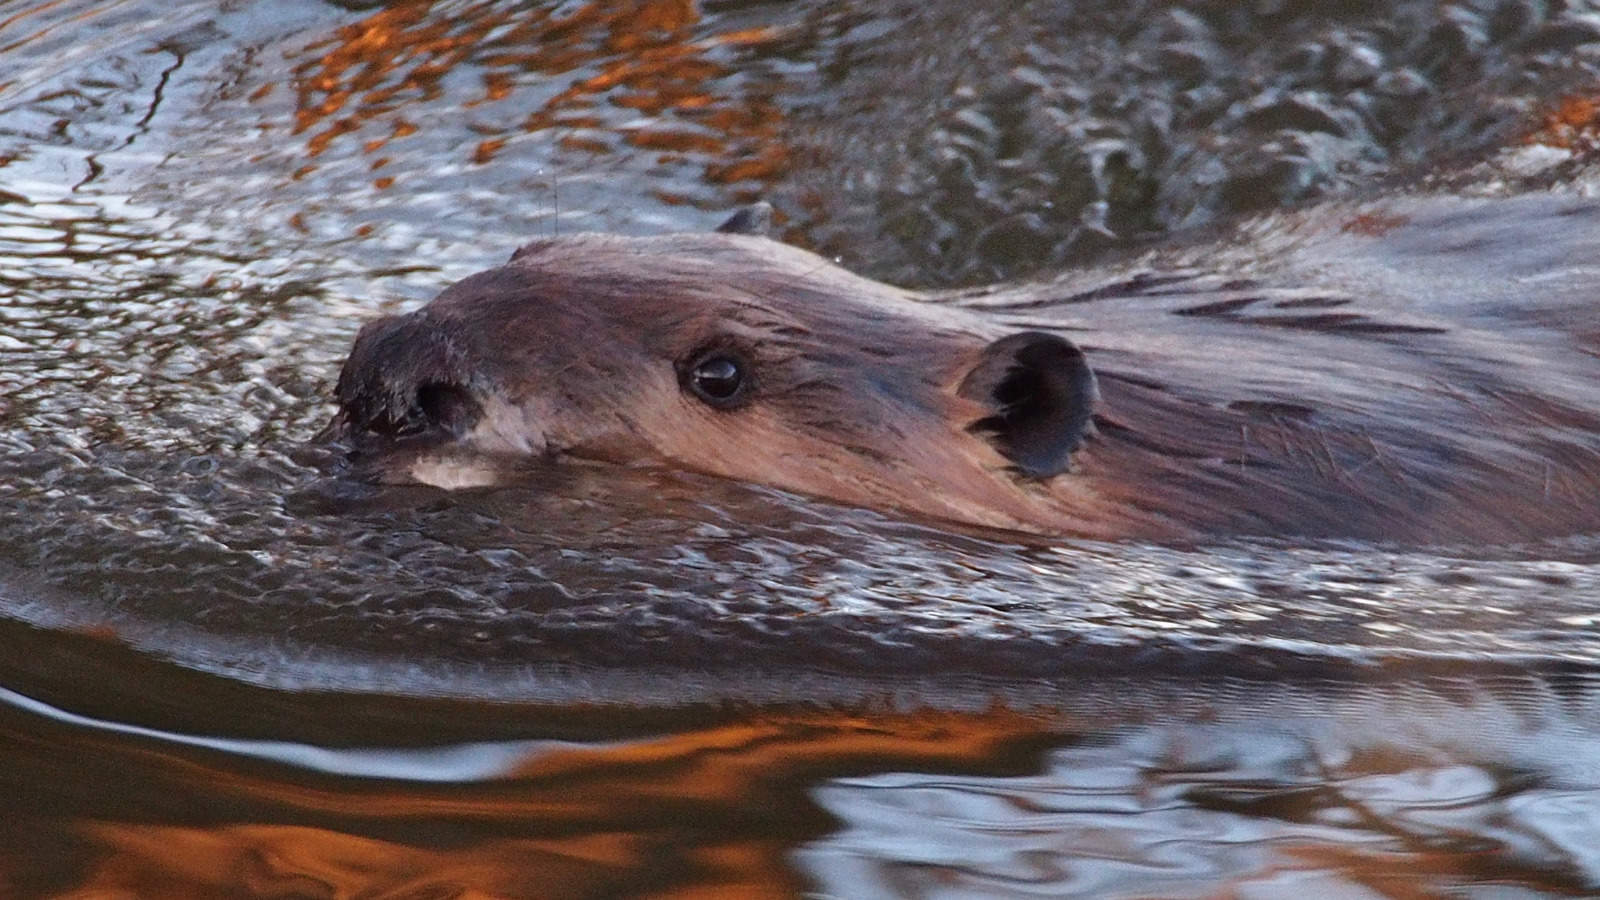 A beavwre swims in rippling water reflecting amber light. Creative Commons courtesy photo